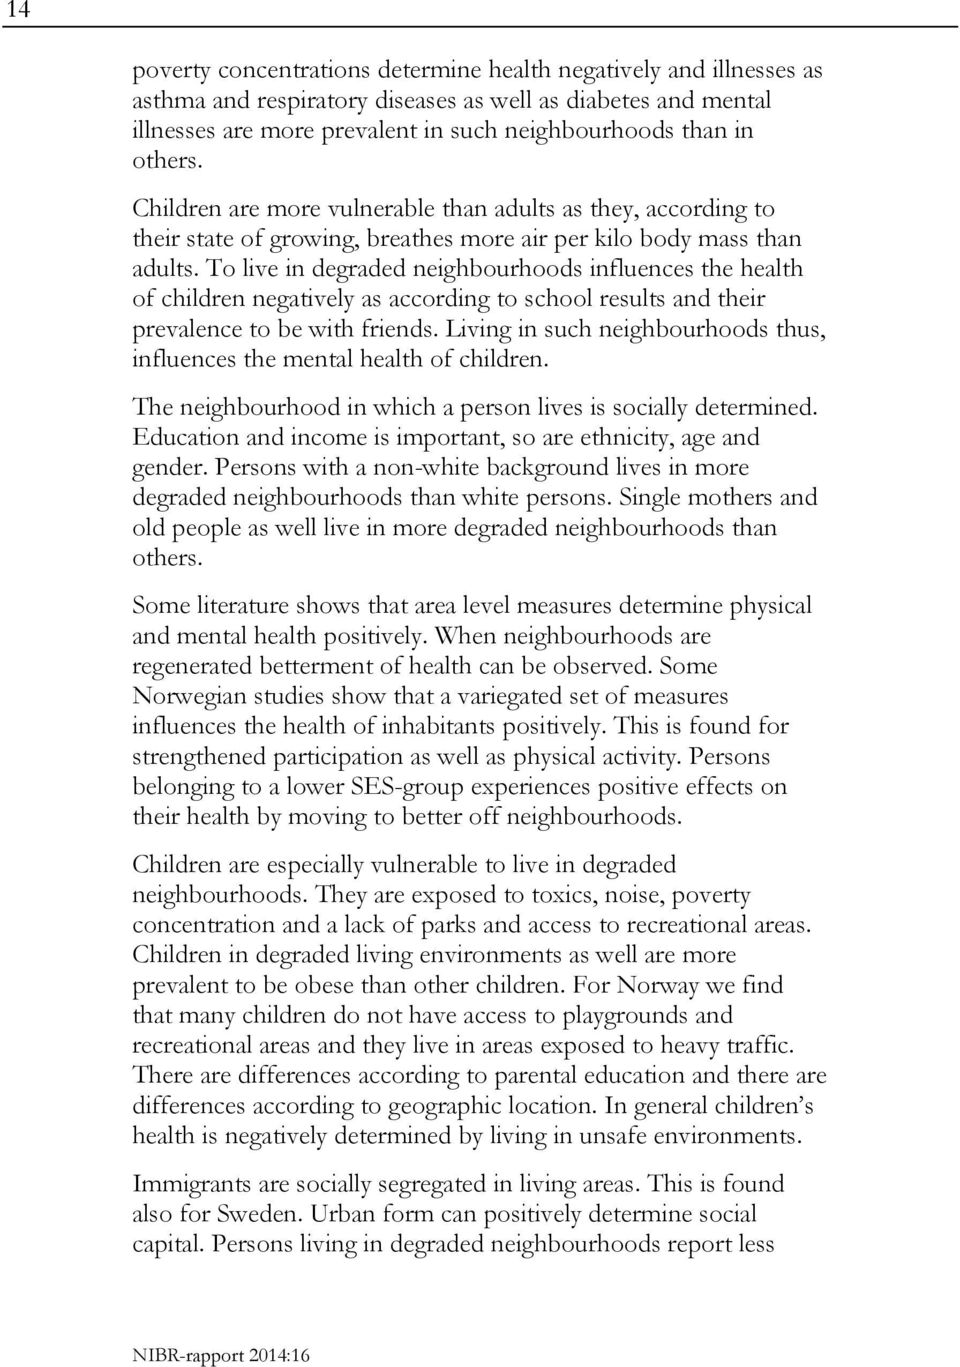 To live in degraded neighbourhoods influences the health of children negatively as according to school results and their prevalence to be with friends.